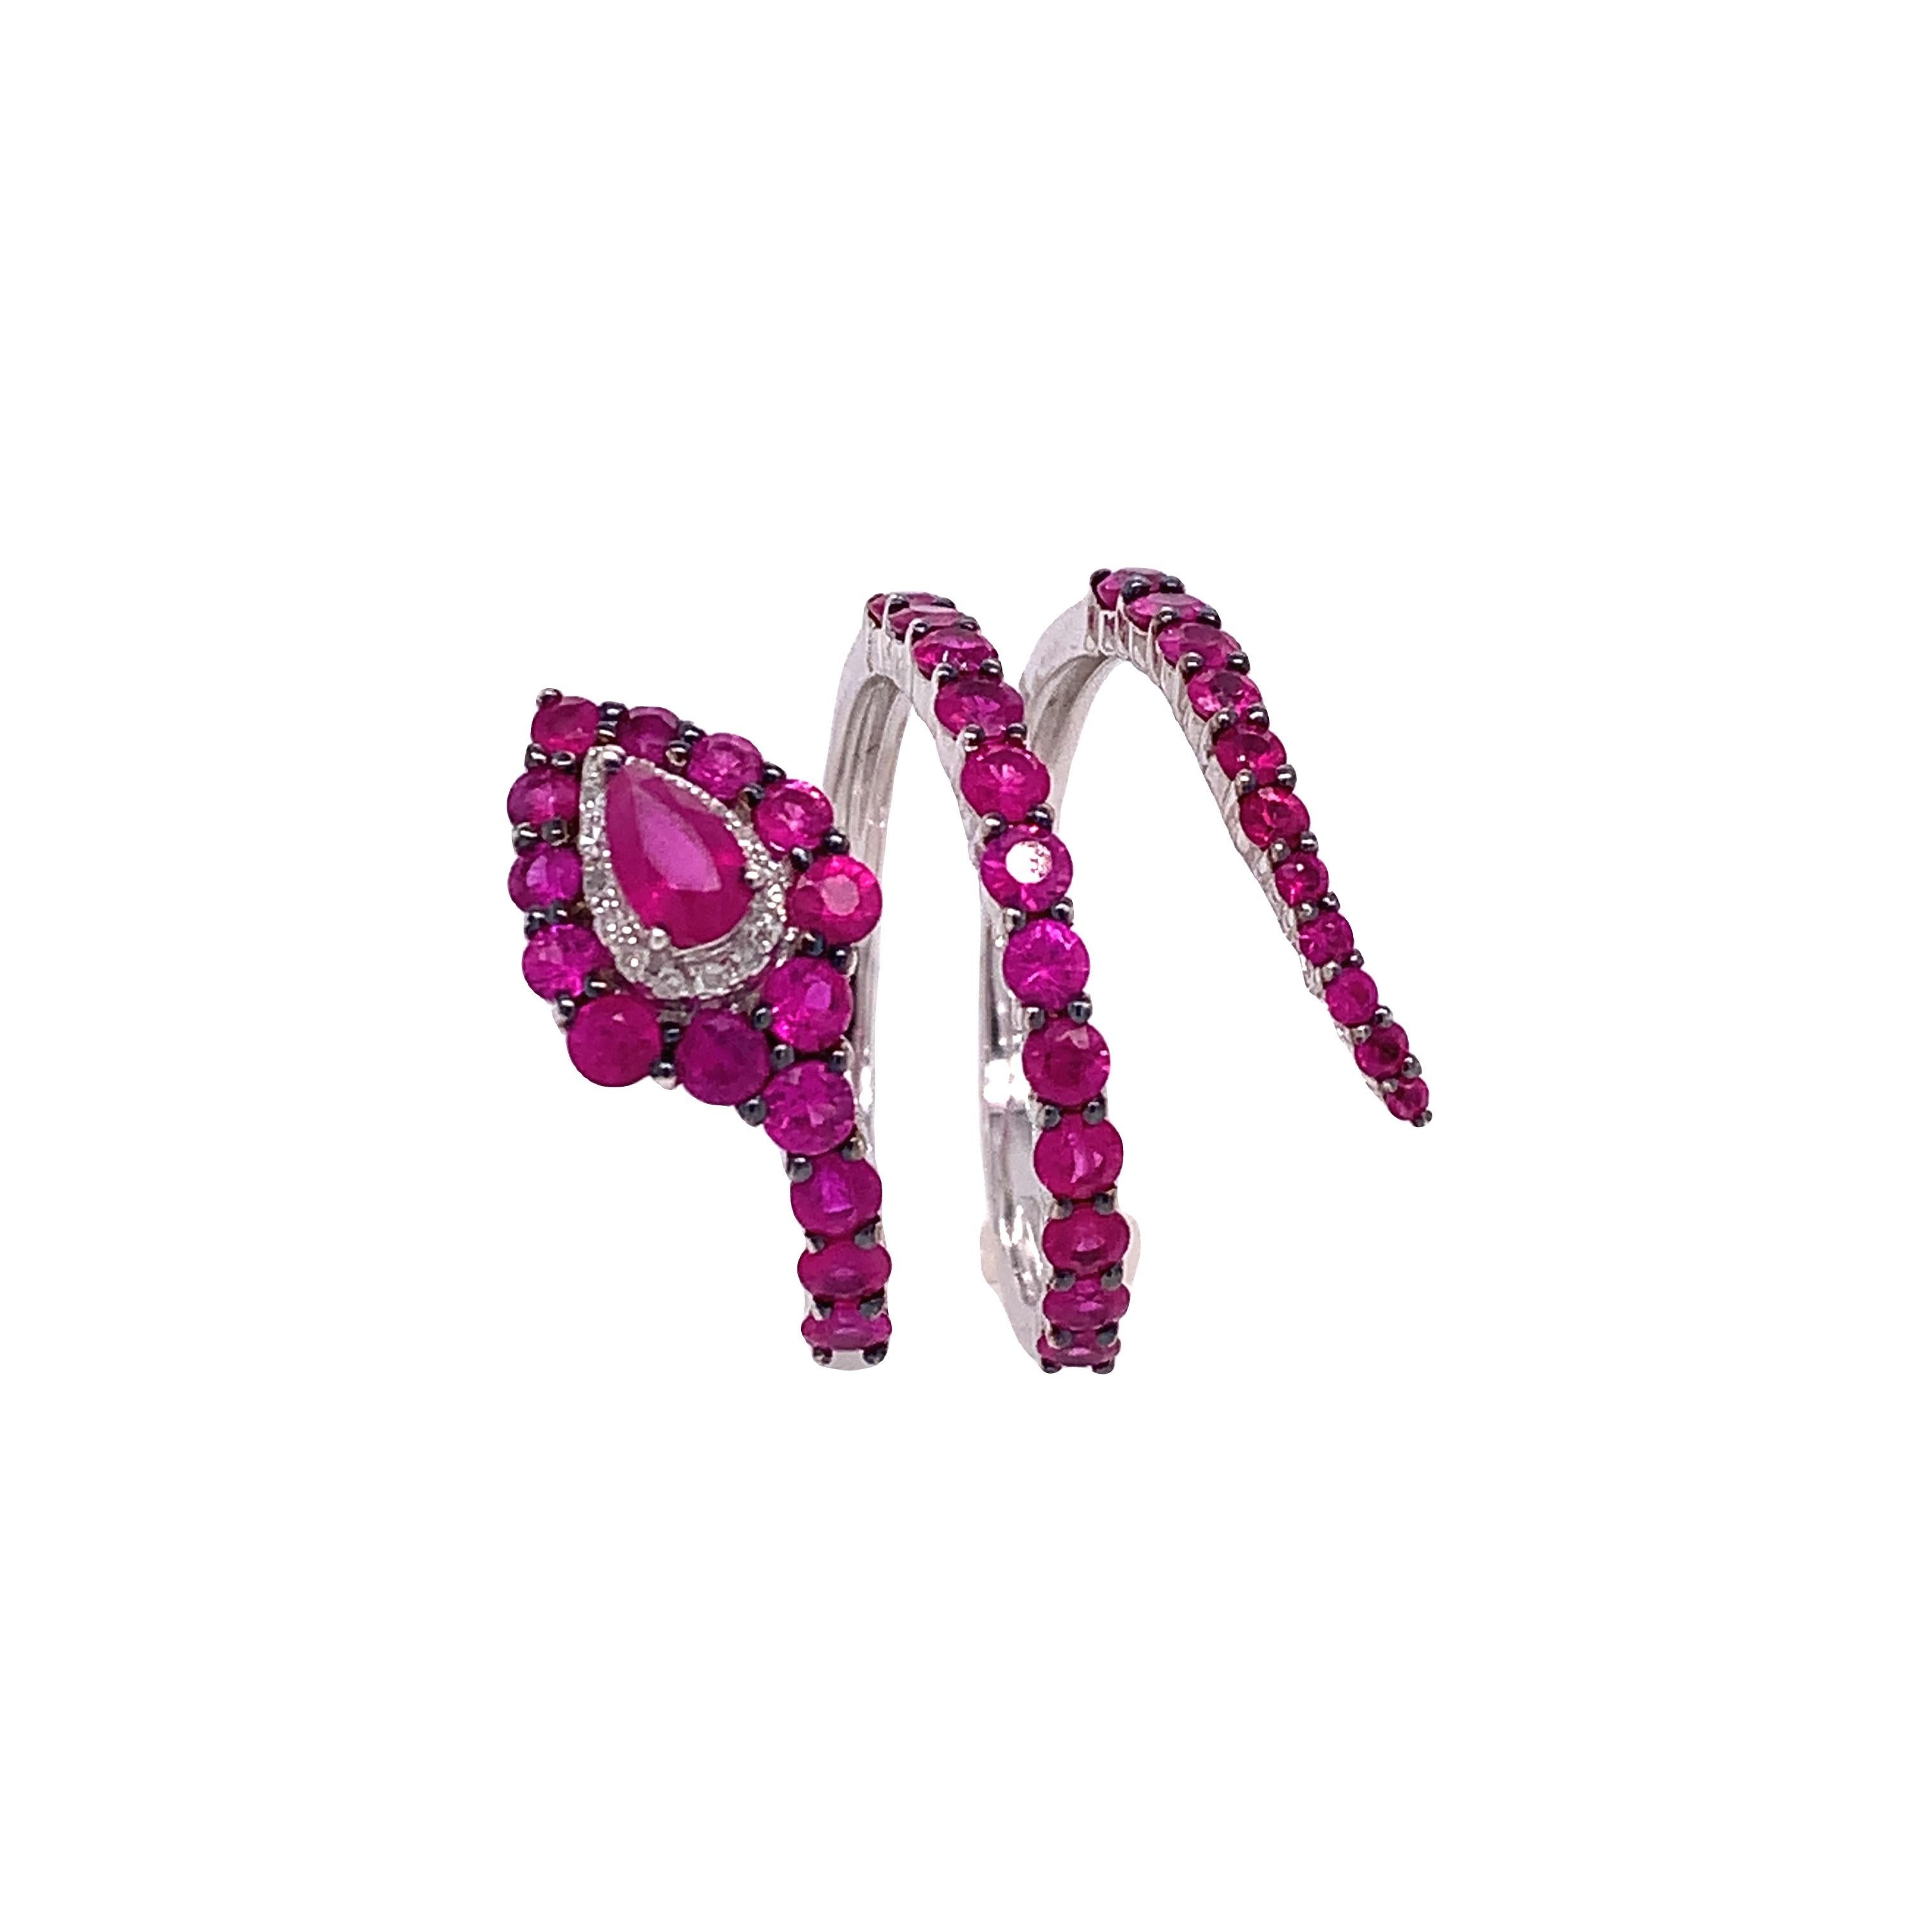 18K White Gold
Ruby: 2.10ct total weight.
Diamond: 0.04ct total weight.
All diamonds are G-H/SI stones.